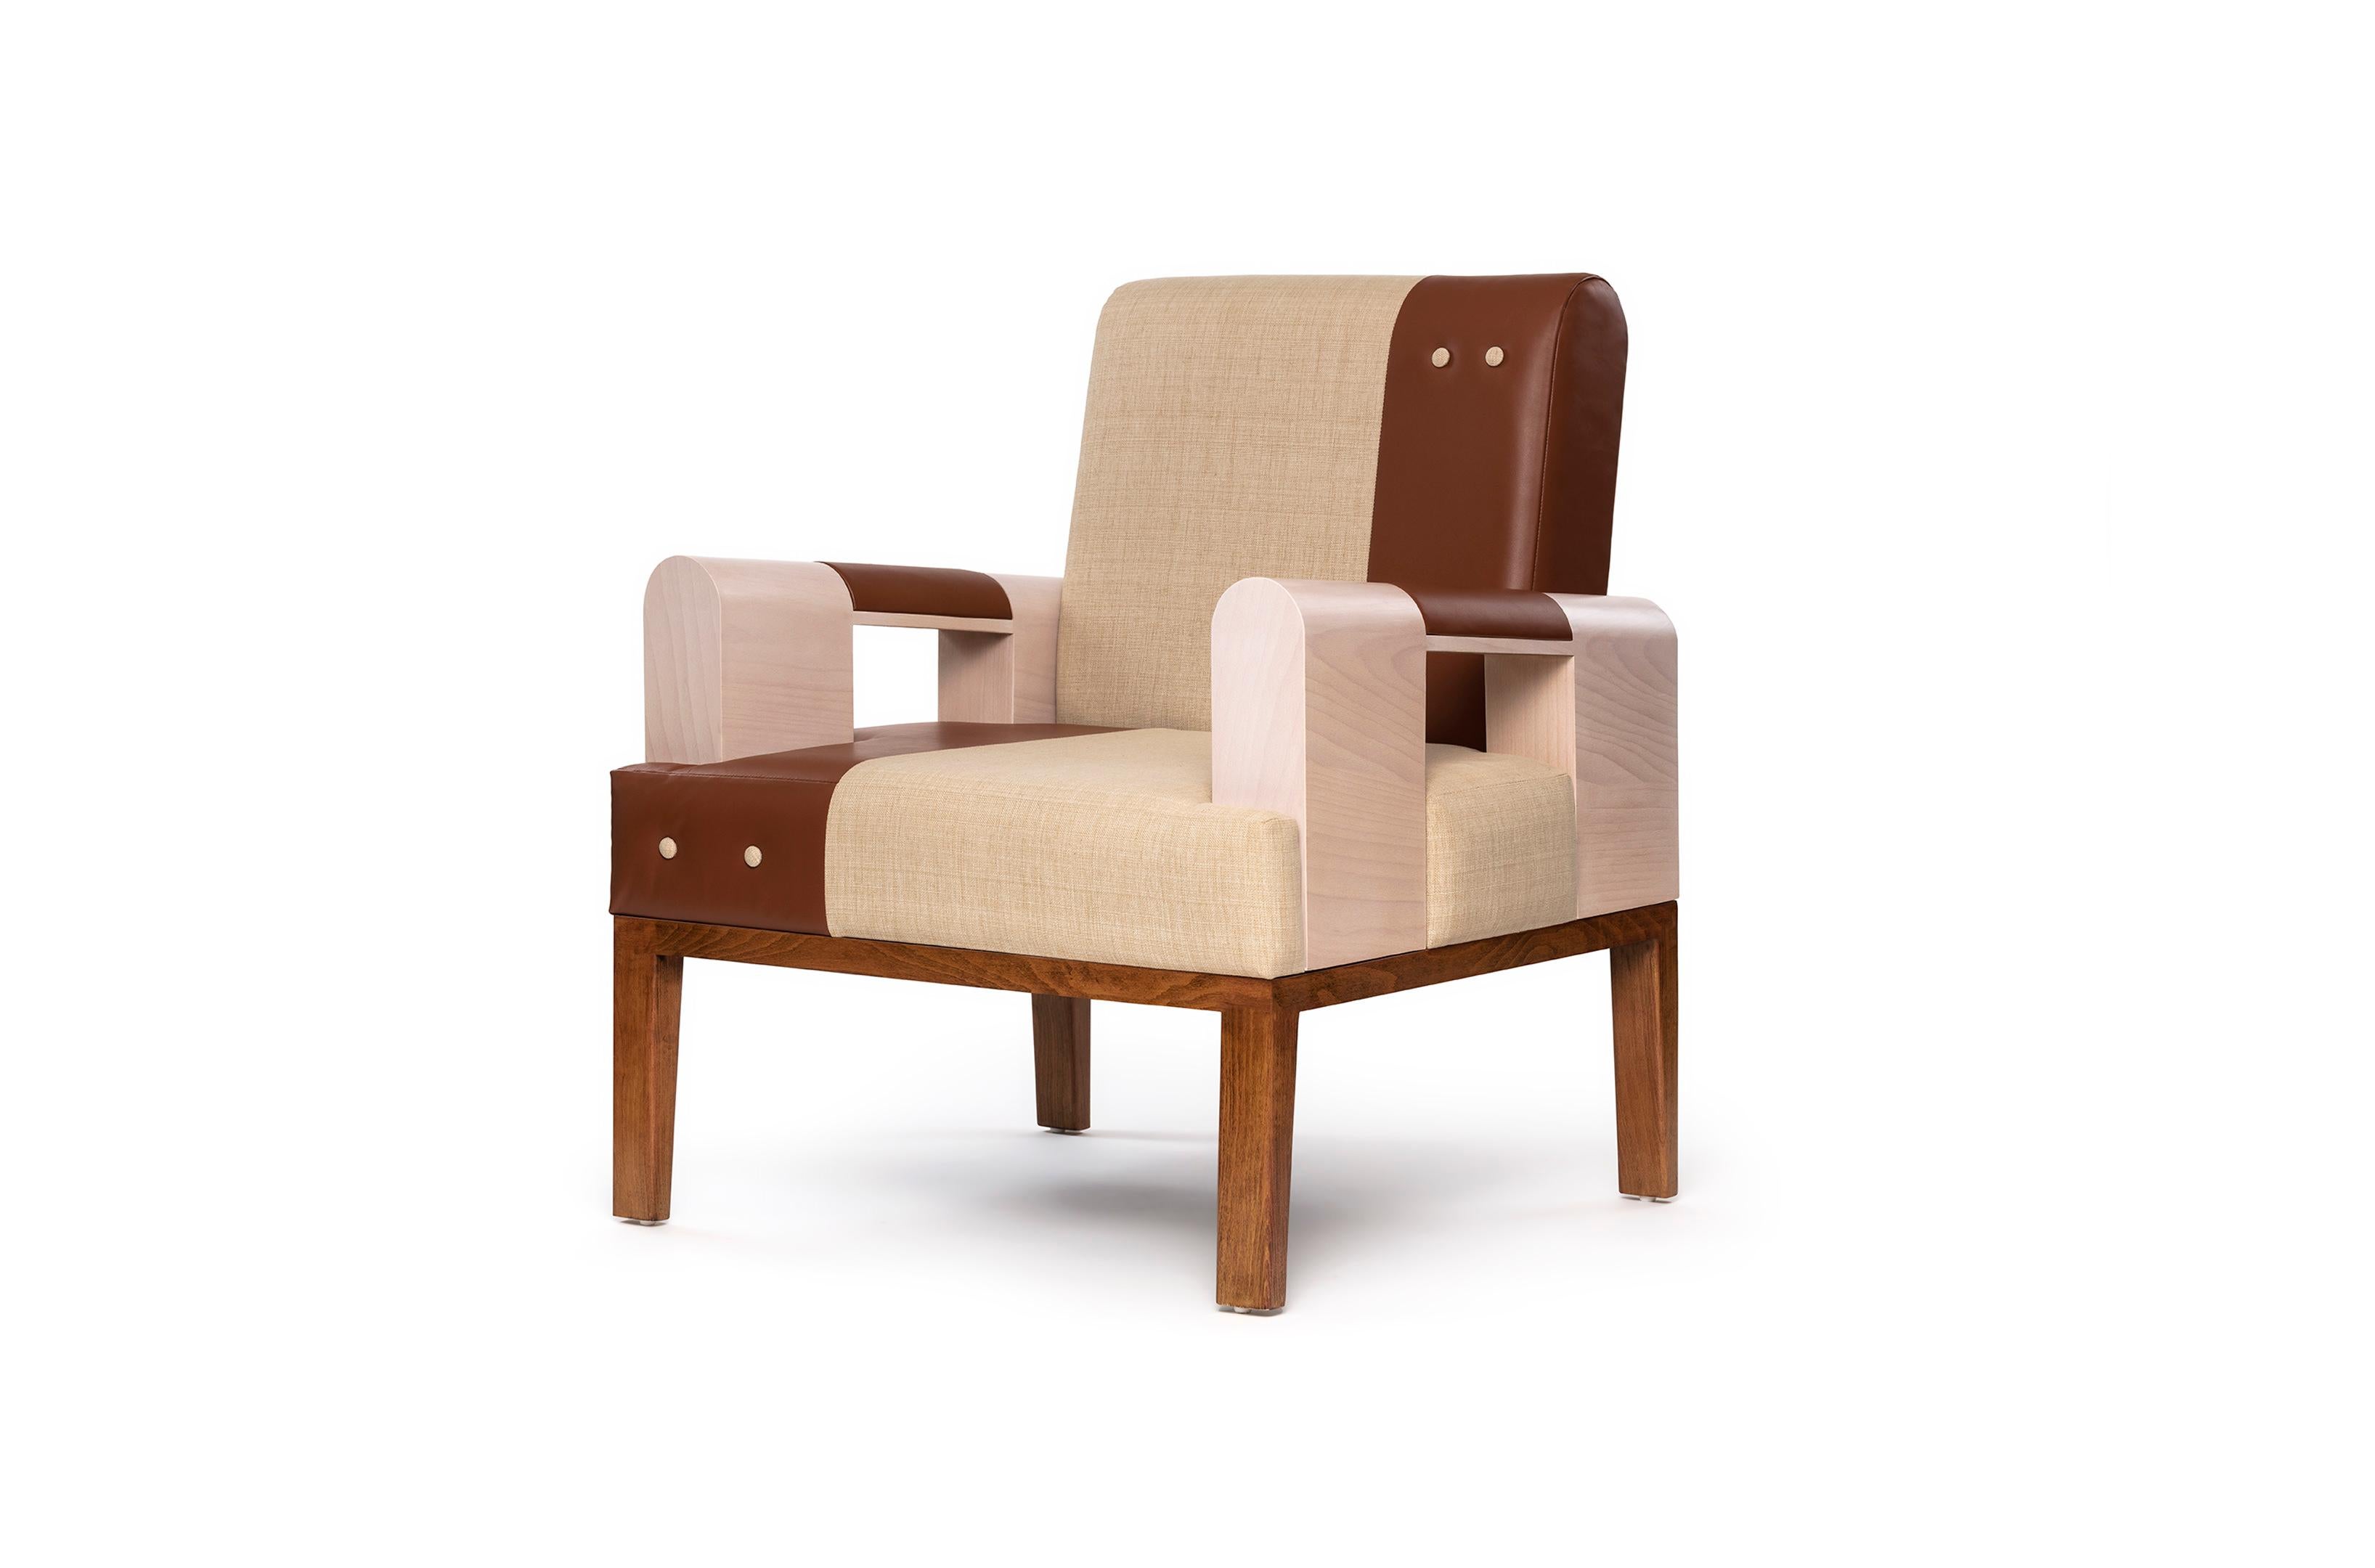 Irregular lines on the armrests add a touch of accent and character to this piece. Our Isu armchair feature high quality leather and unique textile textures and colors. Also customizable for loveseat and sofa.

Solid beechwood frame.
Natural